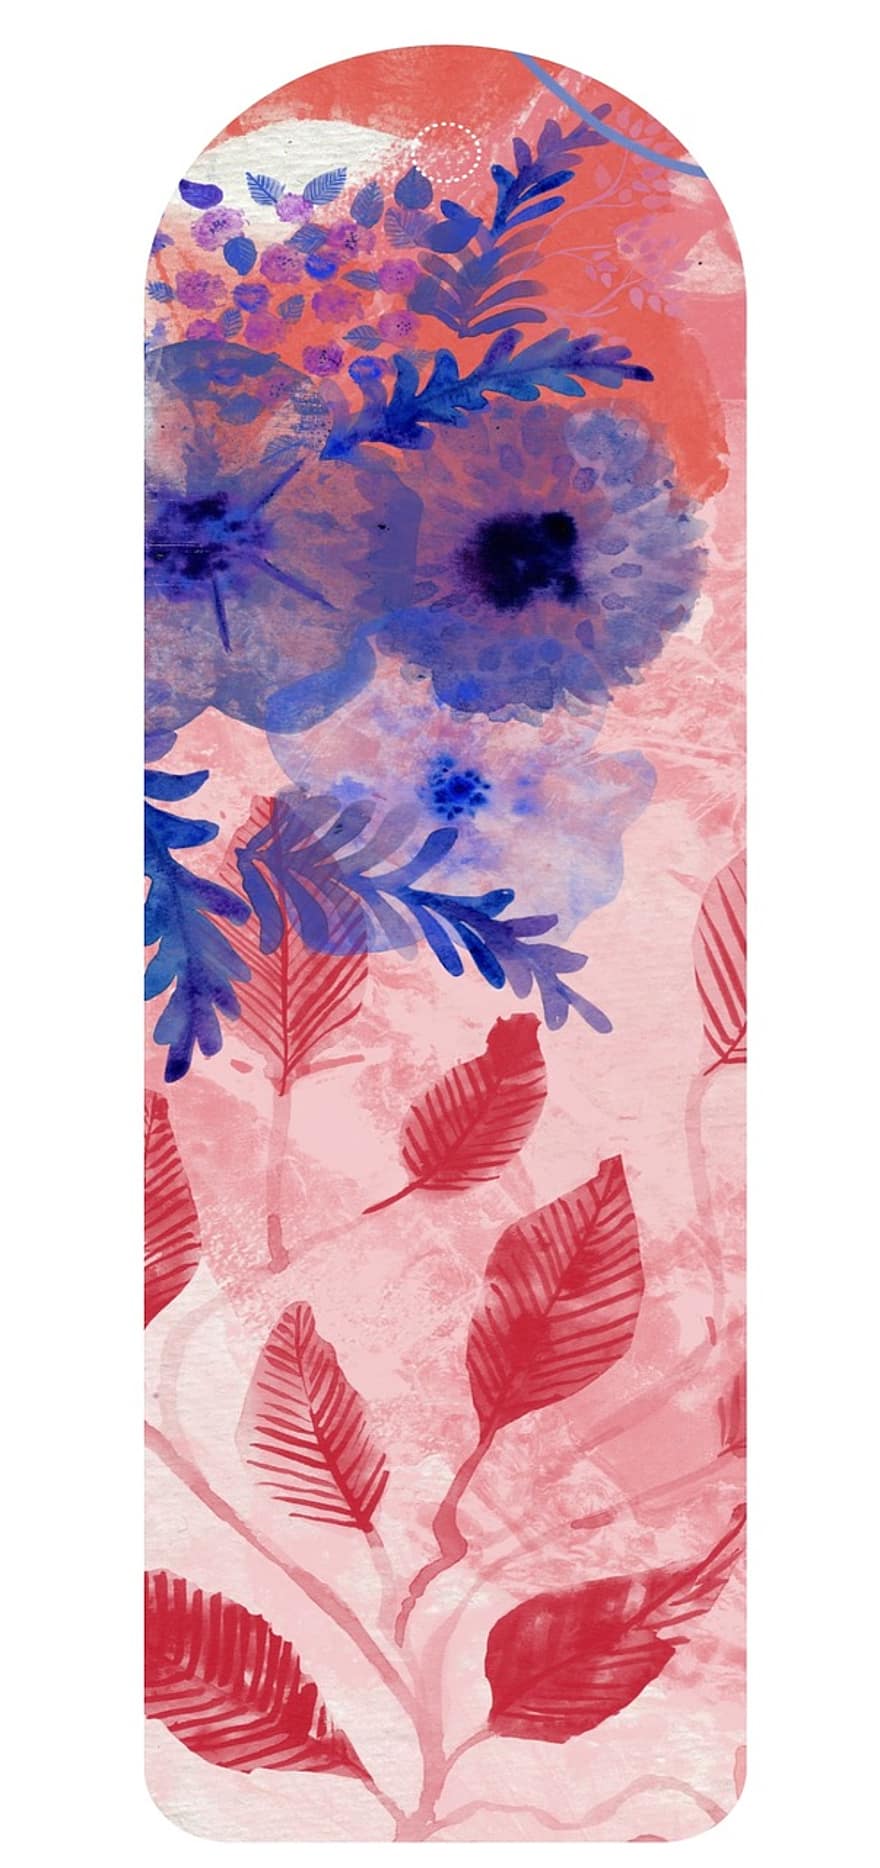 Bookmark, Modern, Artistic, Template, Isolated, Design, Paper, Watercolor, Painted, Blue, Purple